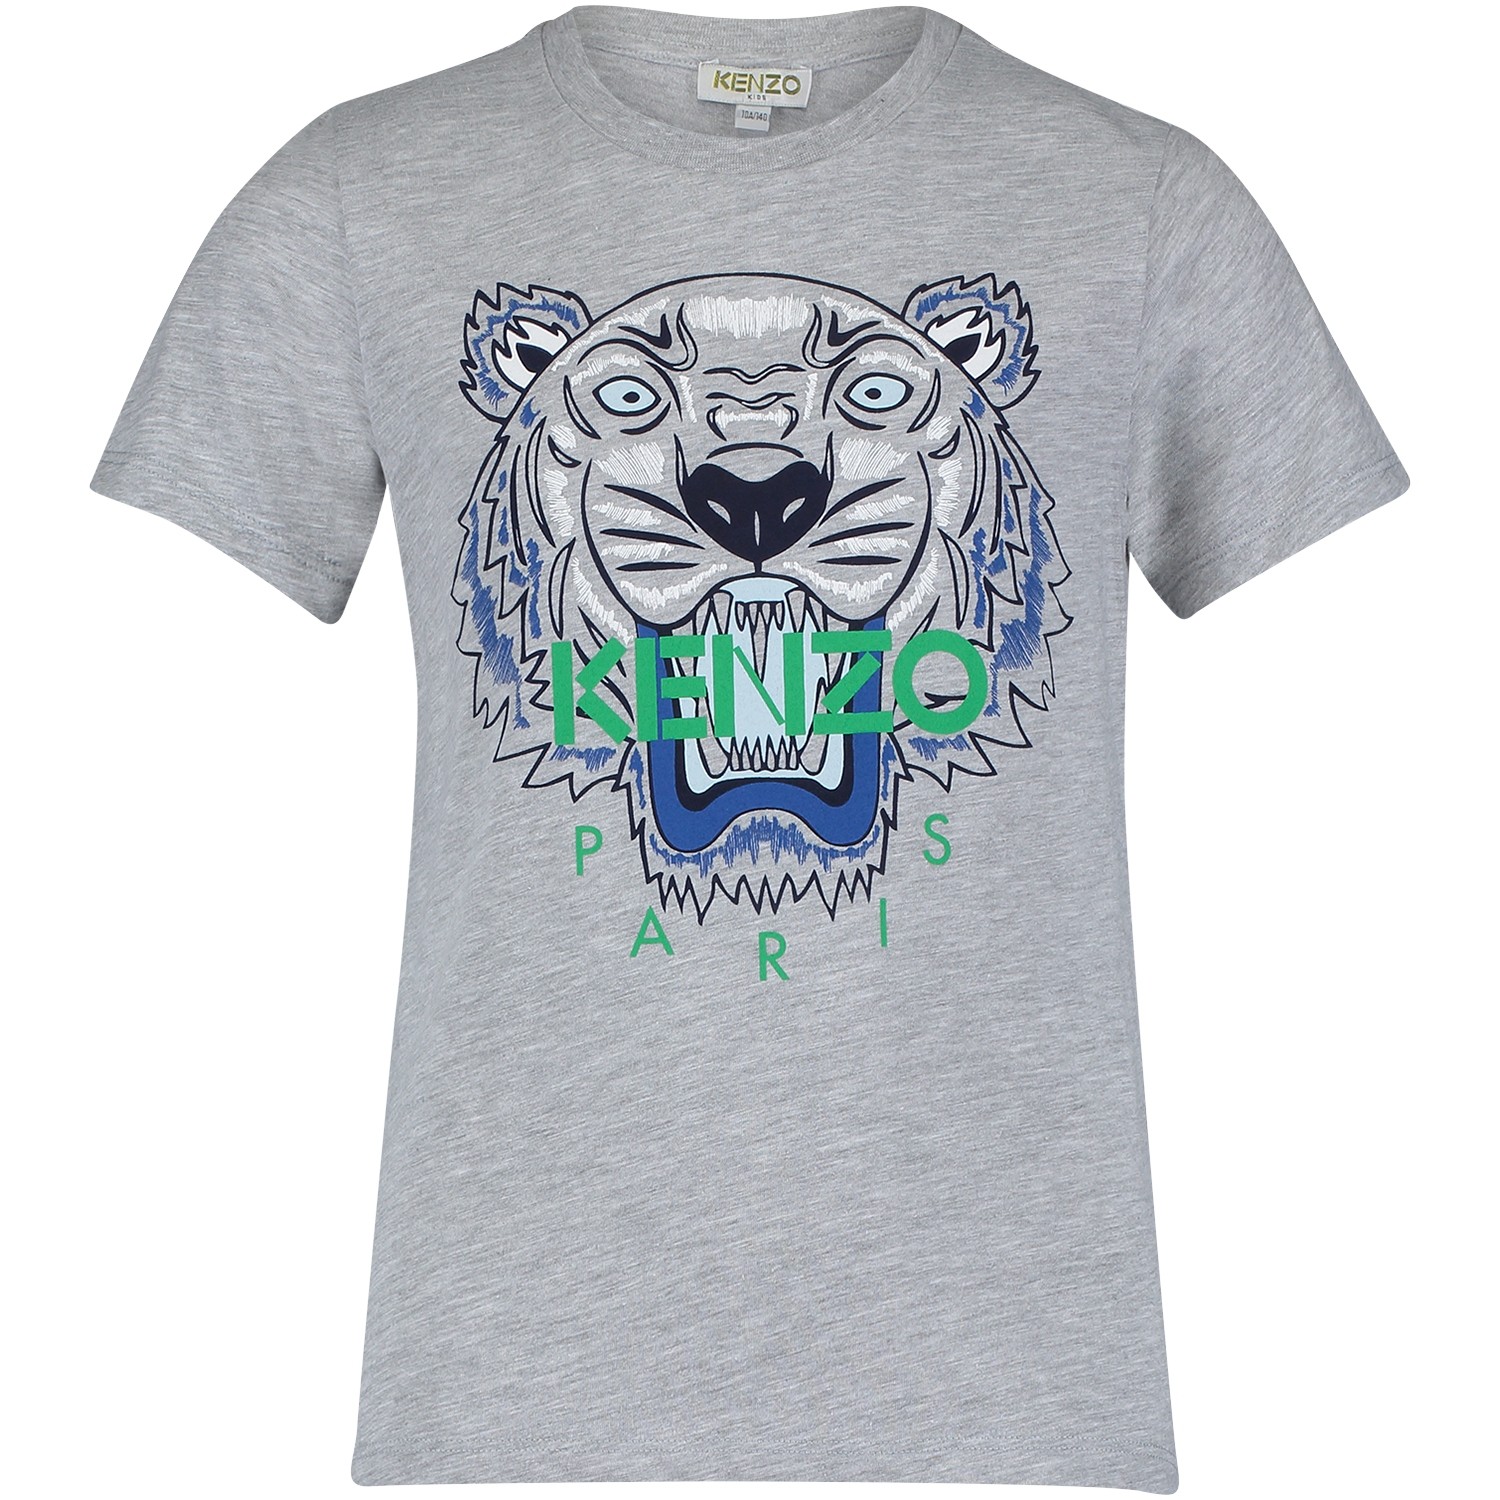 Kenzo Kl10528 Boys Gray at Coccinelle